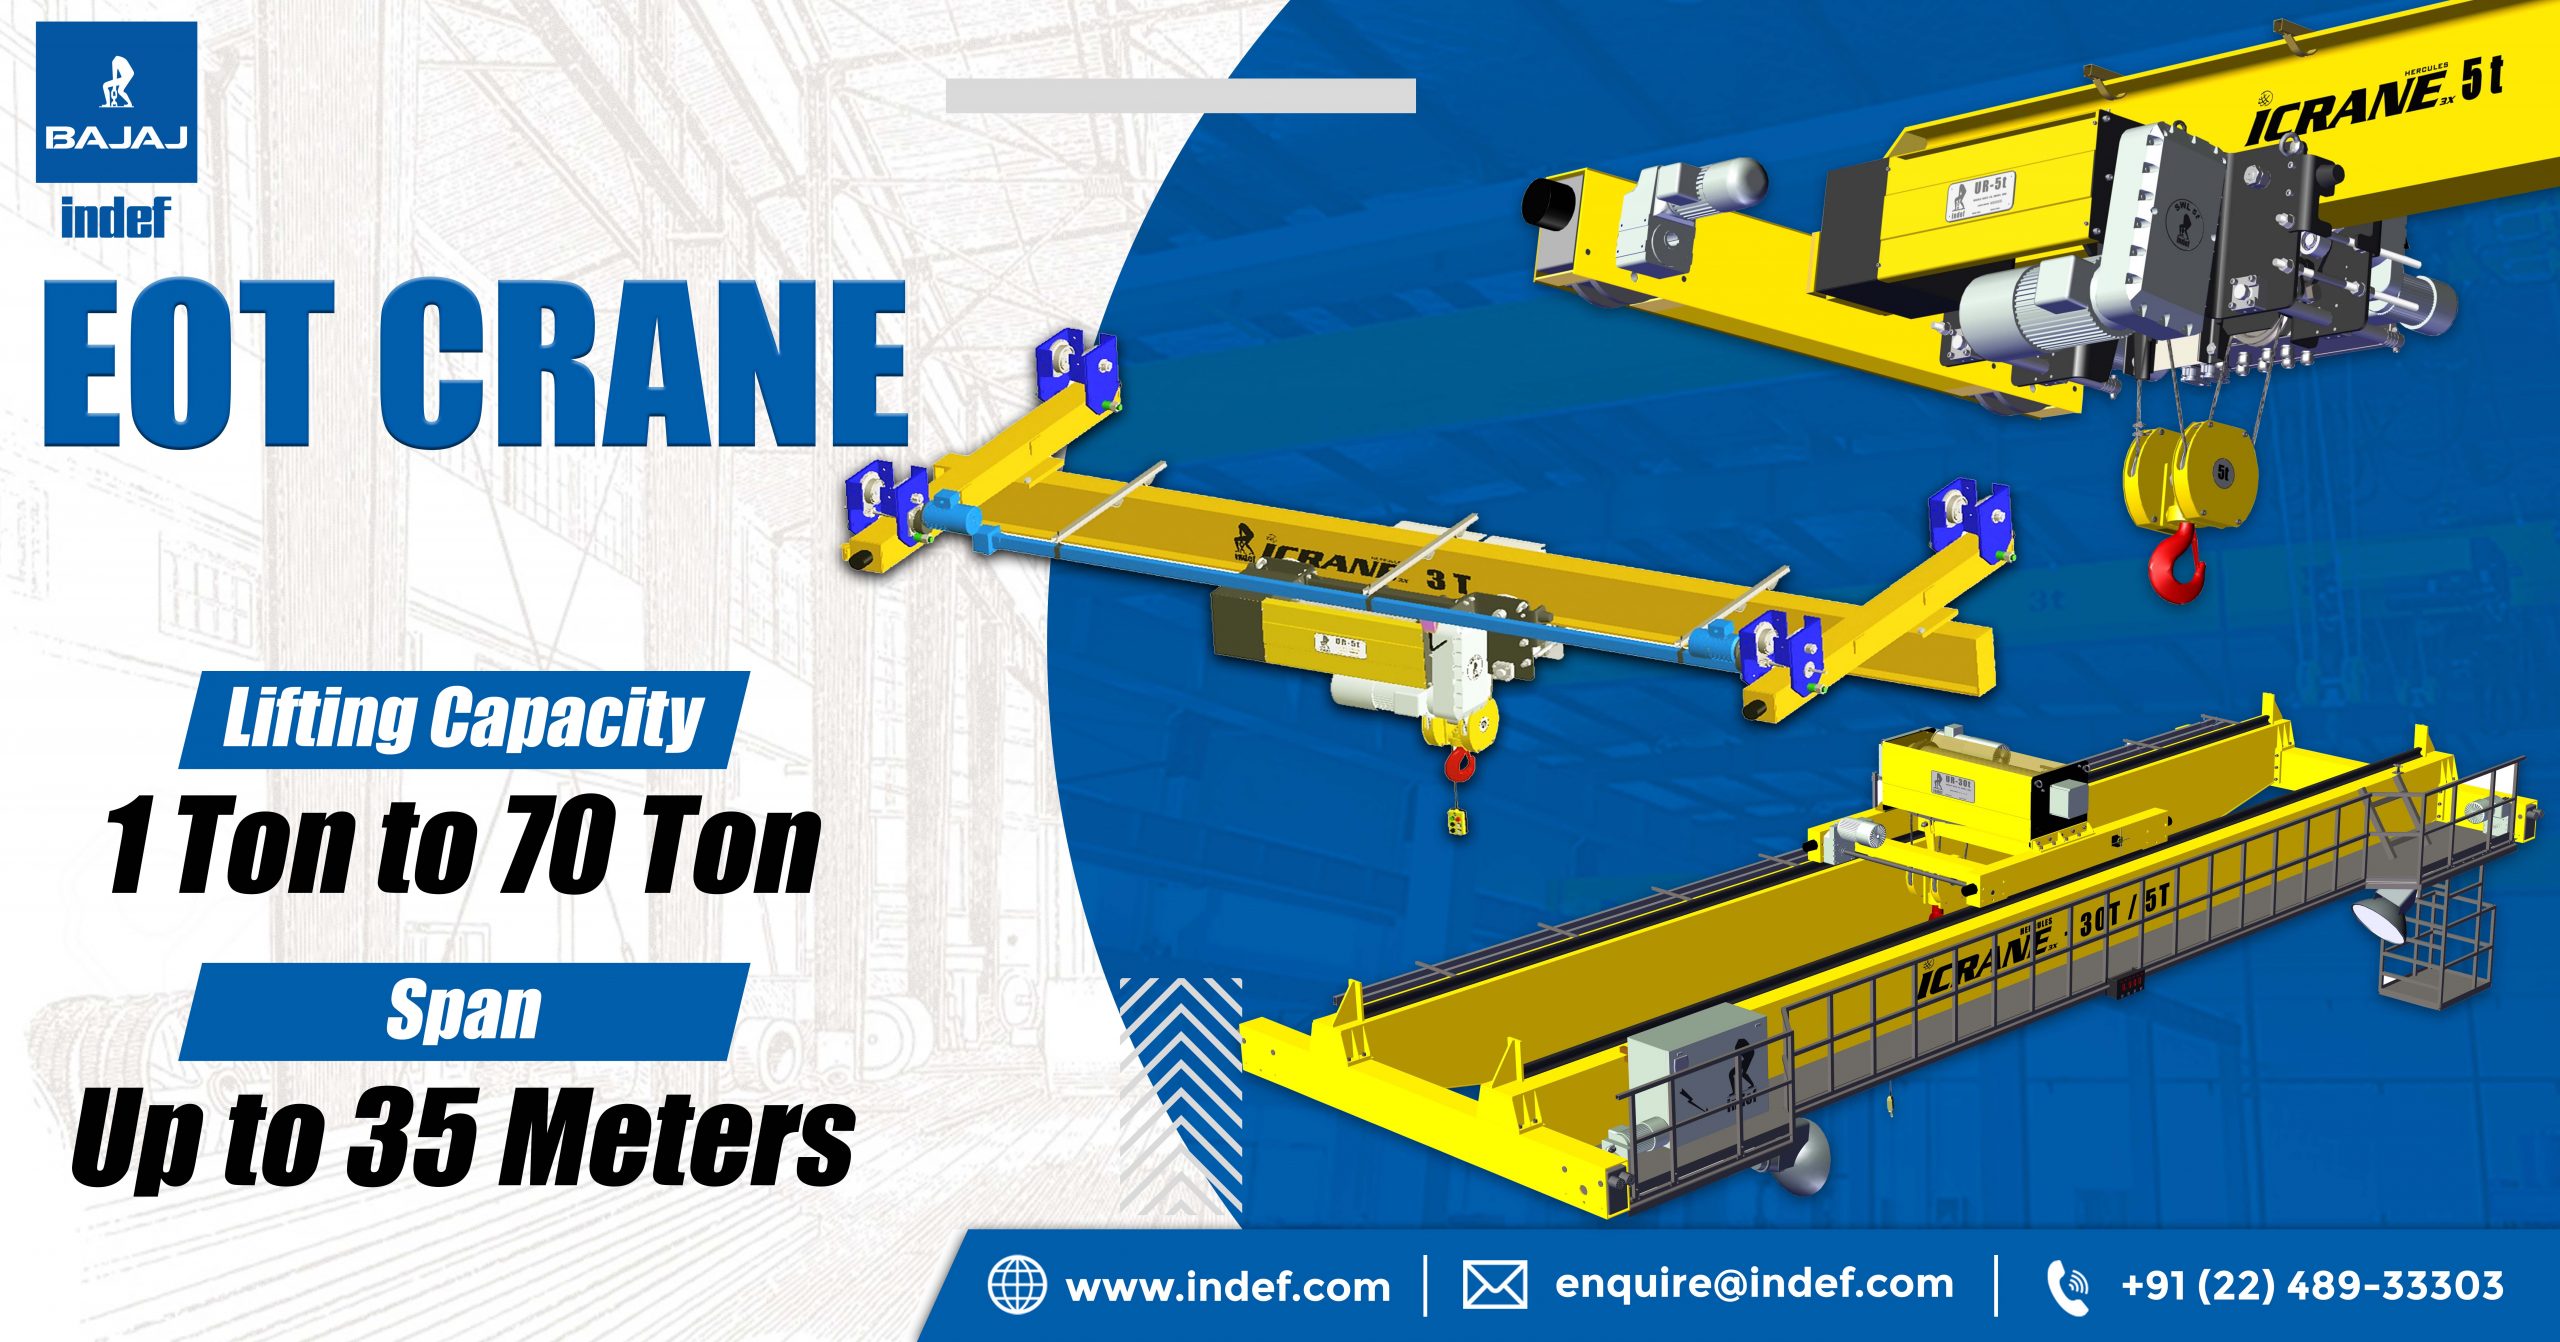 various-high-quality-eot-cranes-from-indef